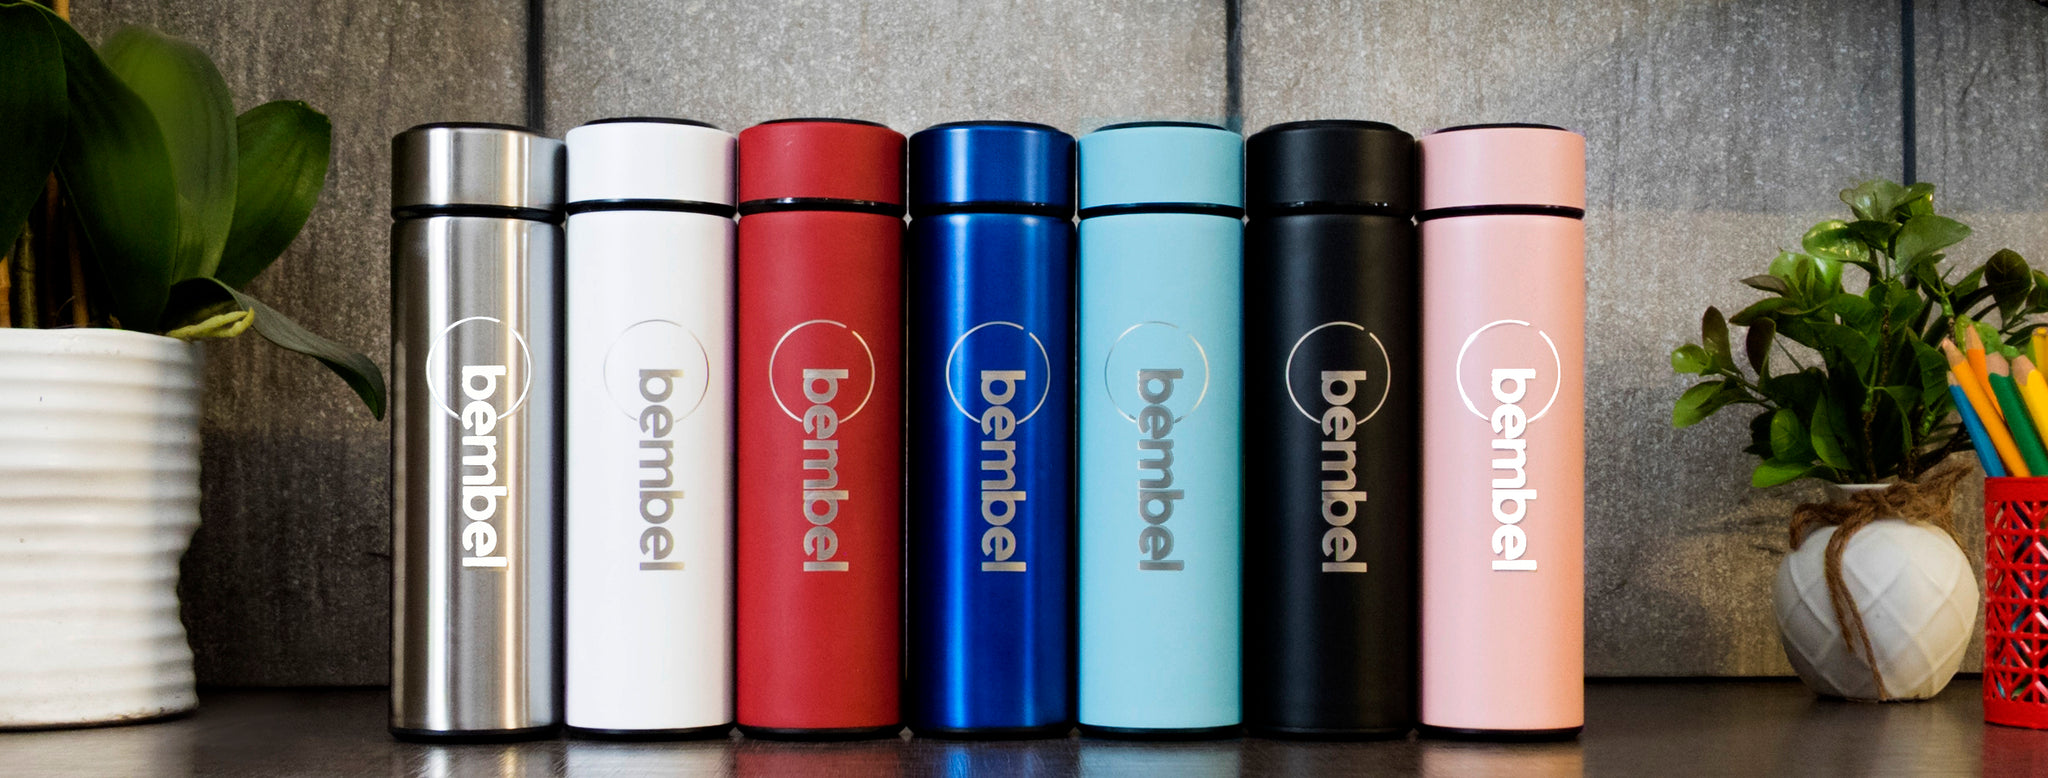 STAY HYDRATED ON THE GO WITH BEMBEL SMART BOTTLE